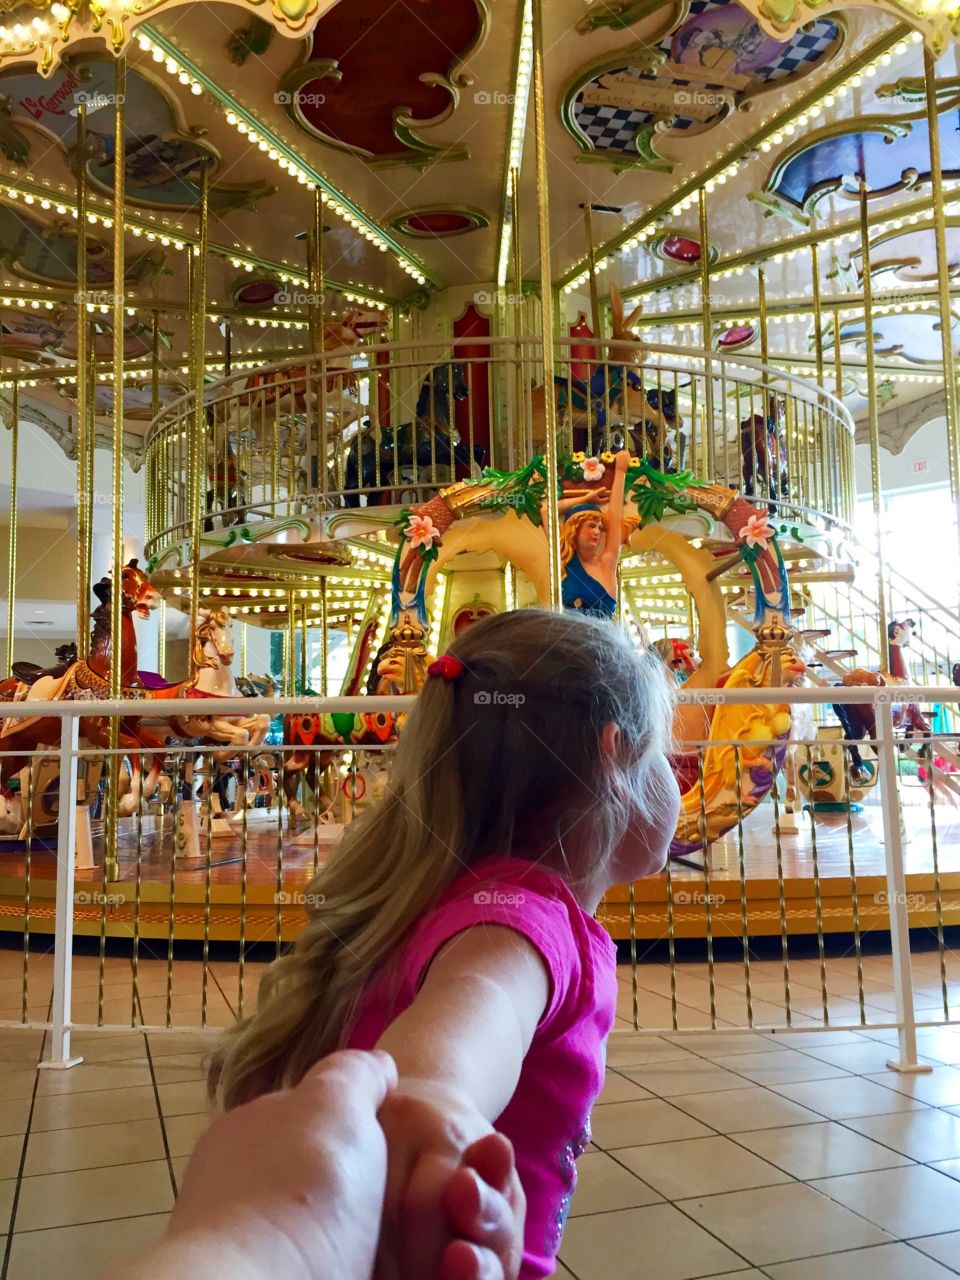 Follow me to the carousel, momma!